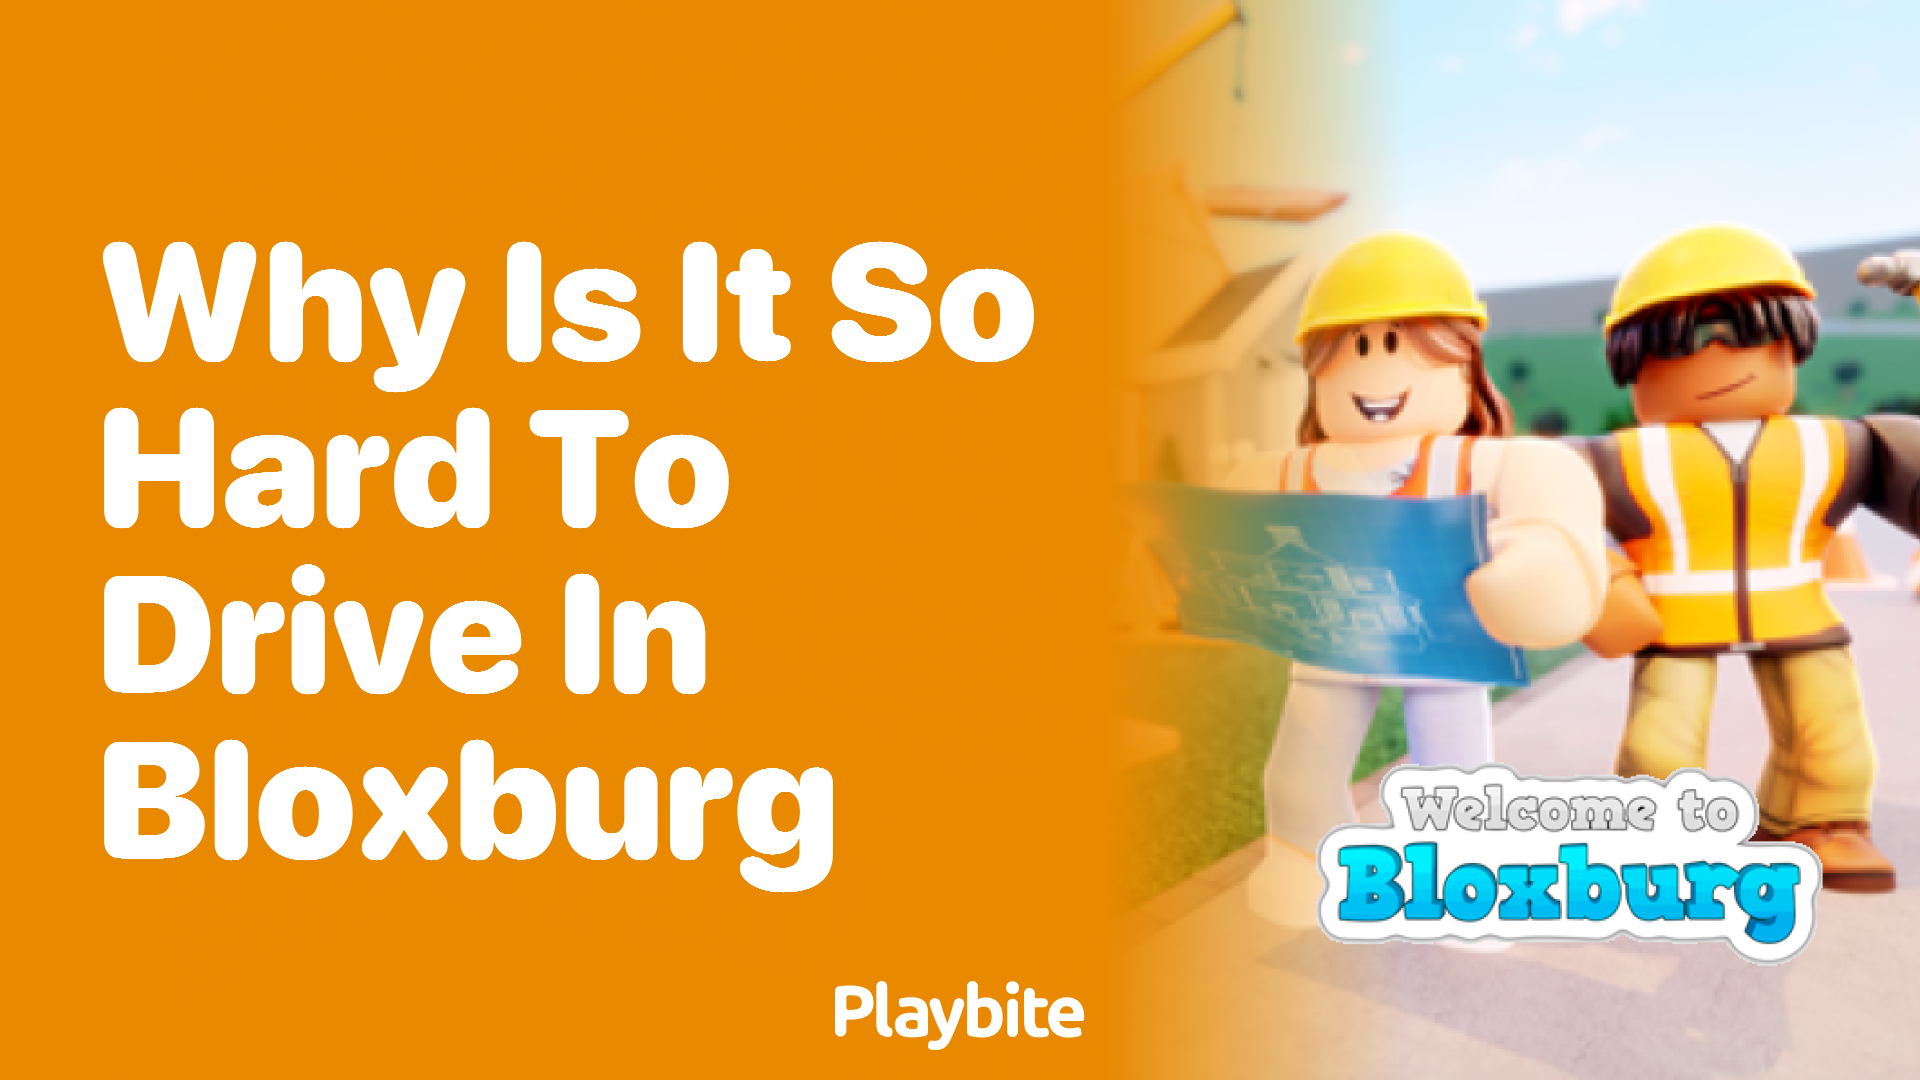 Why Is It So Hard to Drive in Bloxburg?